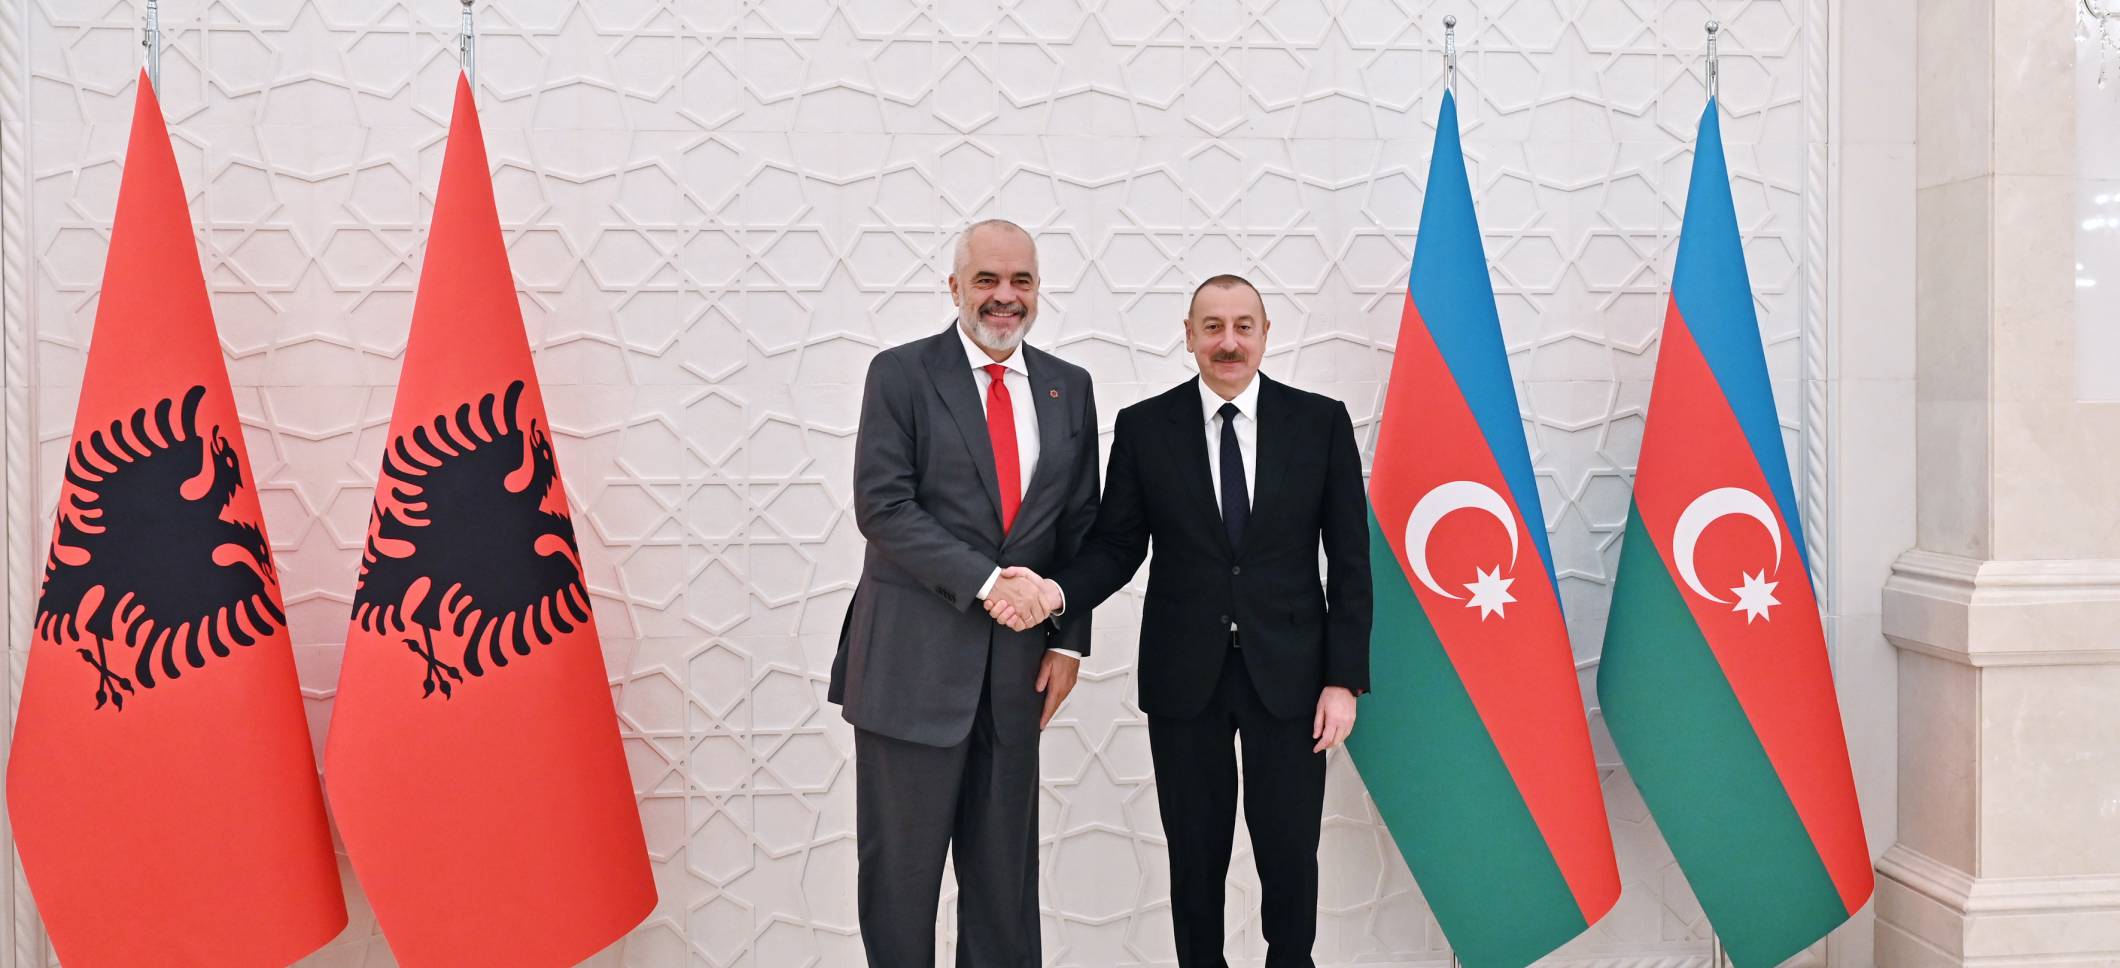 Ilham Aliyev held one-on-one meeting with Prime Minister of Albania Edi Rama